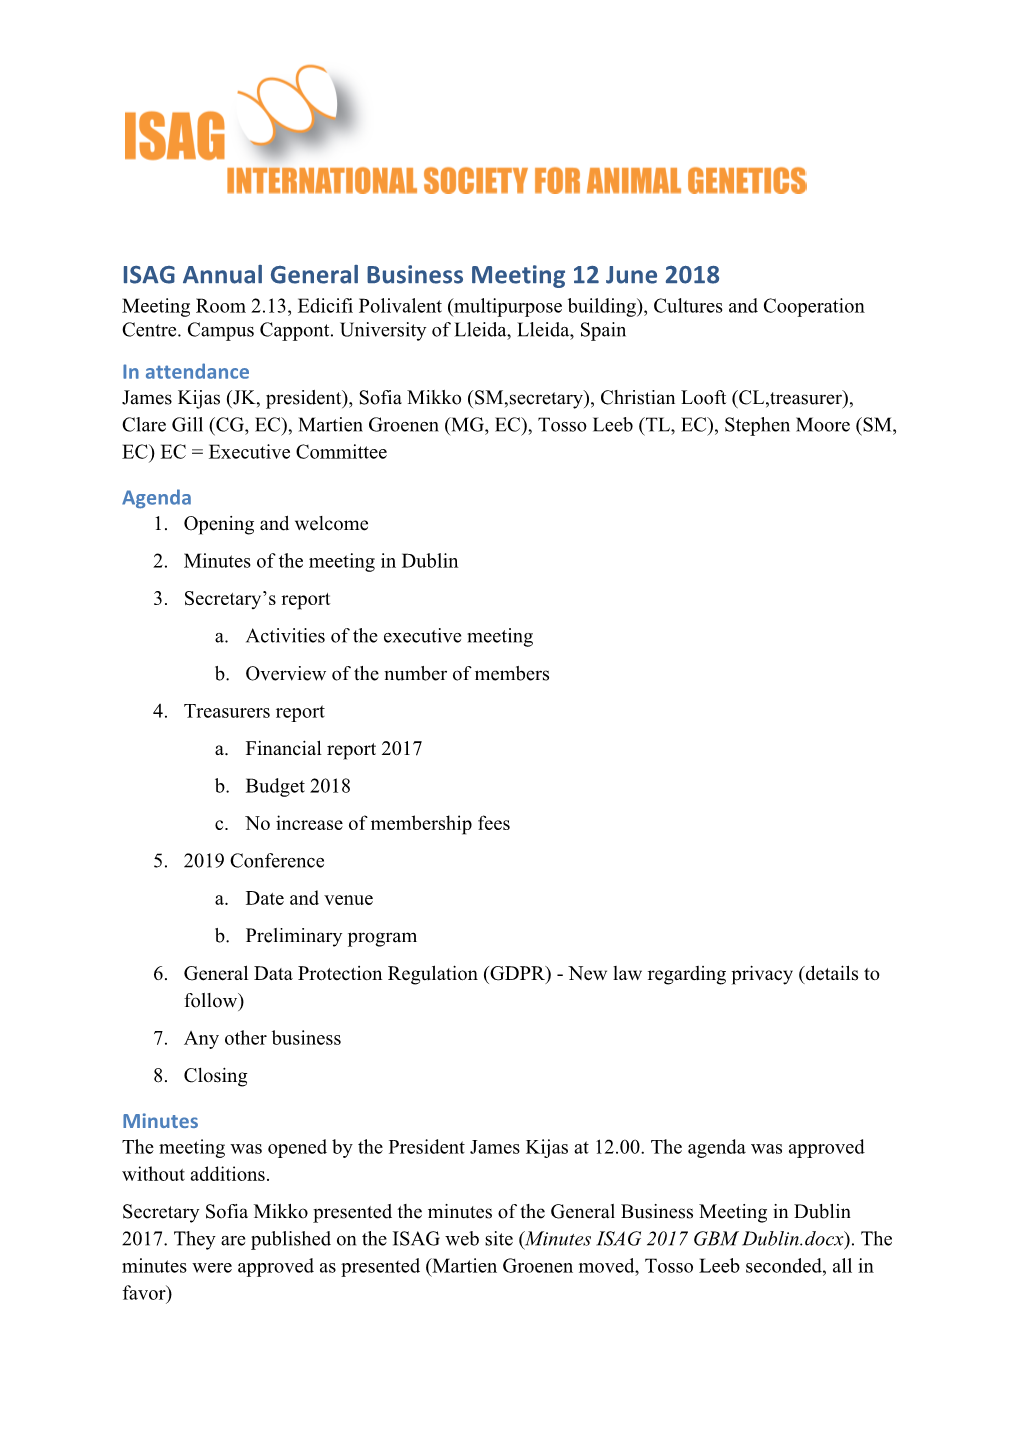 To View the 2018 ISAG General Business Meeting Minutes